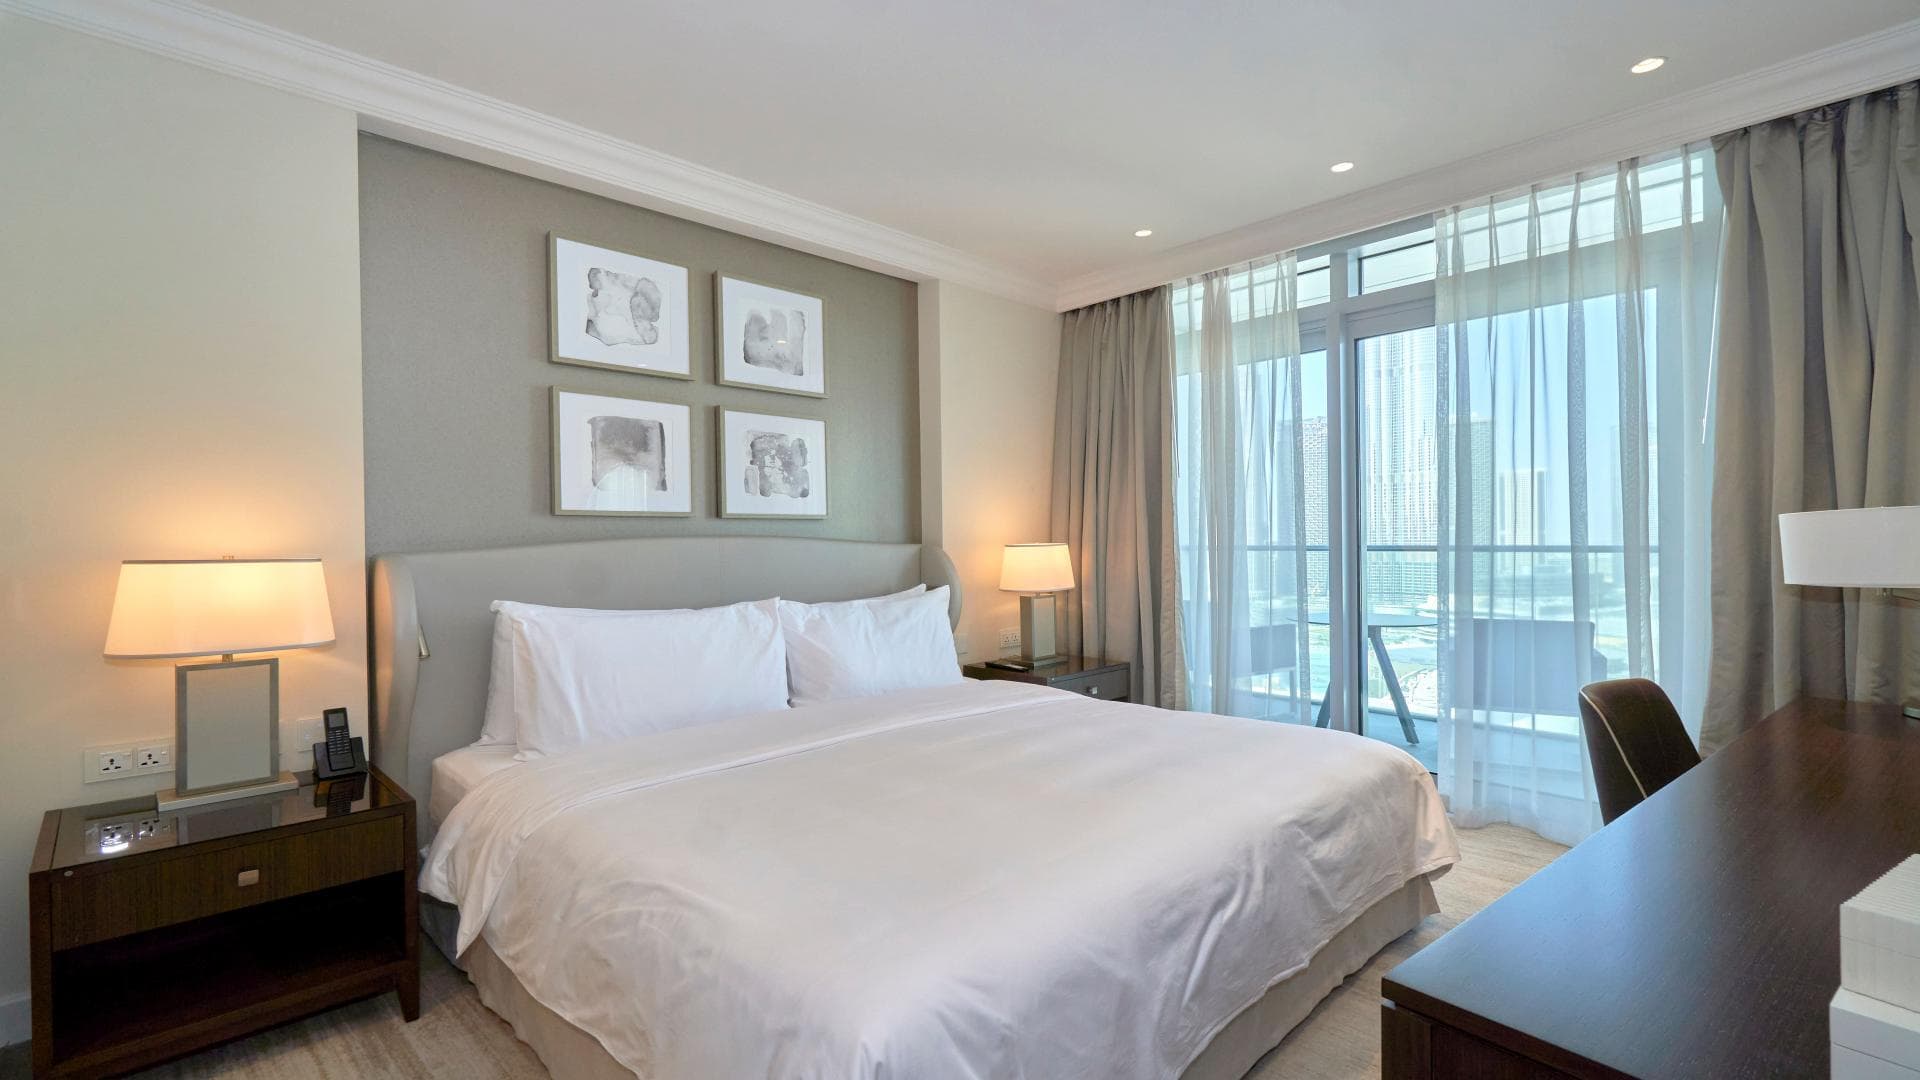 1 Bedroom Apartment For Sale Marina View Tower B Lp36869 1beebc7246b98900.jpeg